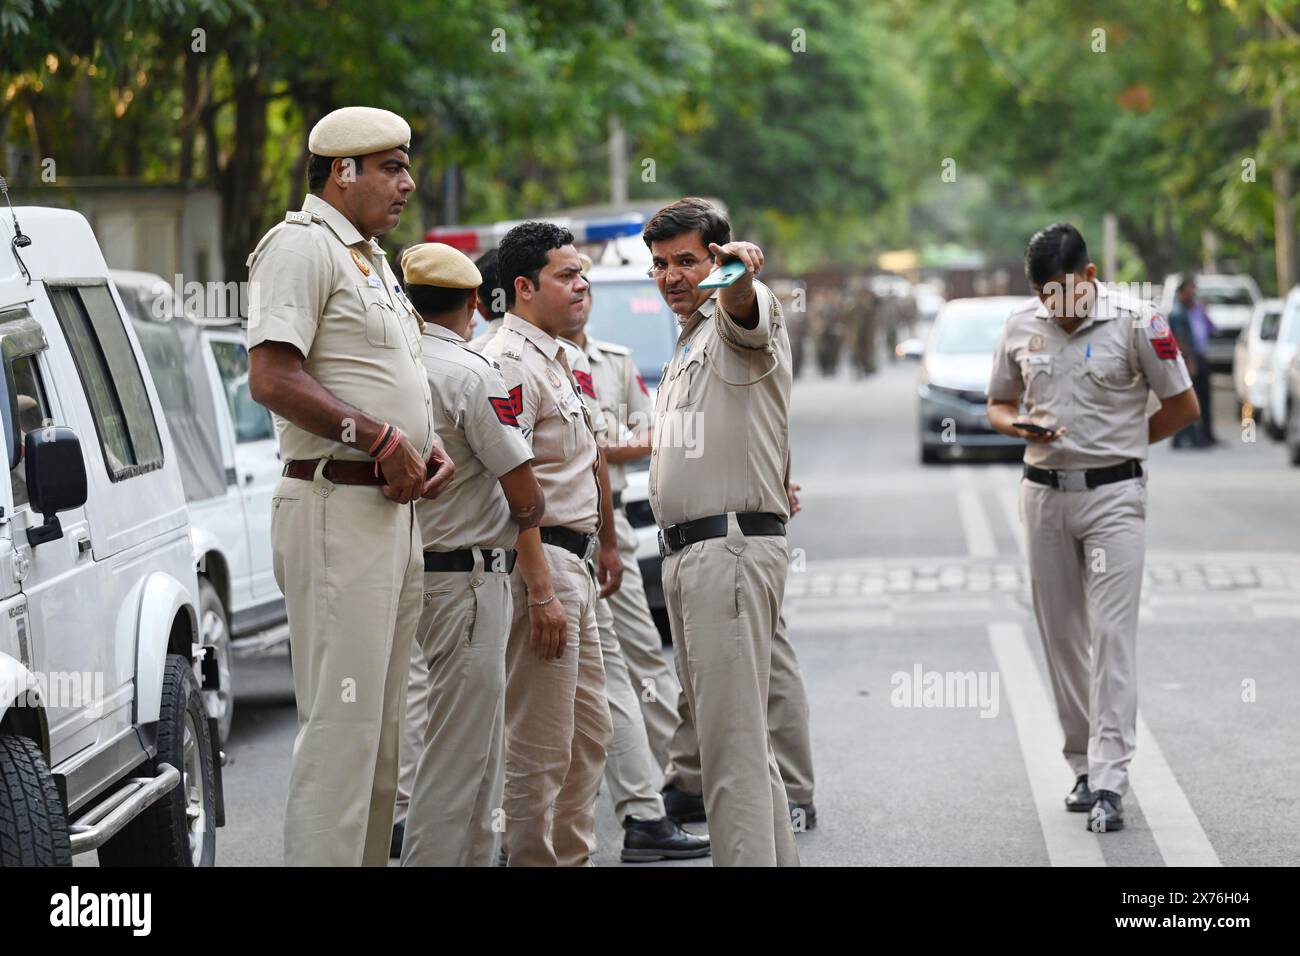 NEW DELHI, INDIA - MAY 17: Delhi Police team leaves the residence of Delhi Chief Minister Arvind Kejriwal after investigation of alleged assault case on May 17, 2024 in New Delhi, India. A team of Delhi Police accompanied by forensic experts visited Chief Minister Arvind Kejriwal residence here Friday and collected evidence in connection with the alleged assault on party MP Swati Maliwal there, officials said. Maliwal was also taken to the CM's house to recreate the crime scene and the sequence of event. (Photo by Sanchit Khanna/Hindustan Times/Sipa USA) Stock Photo